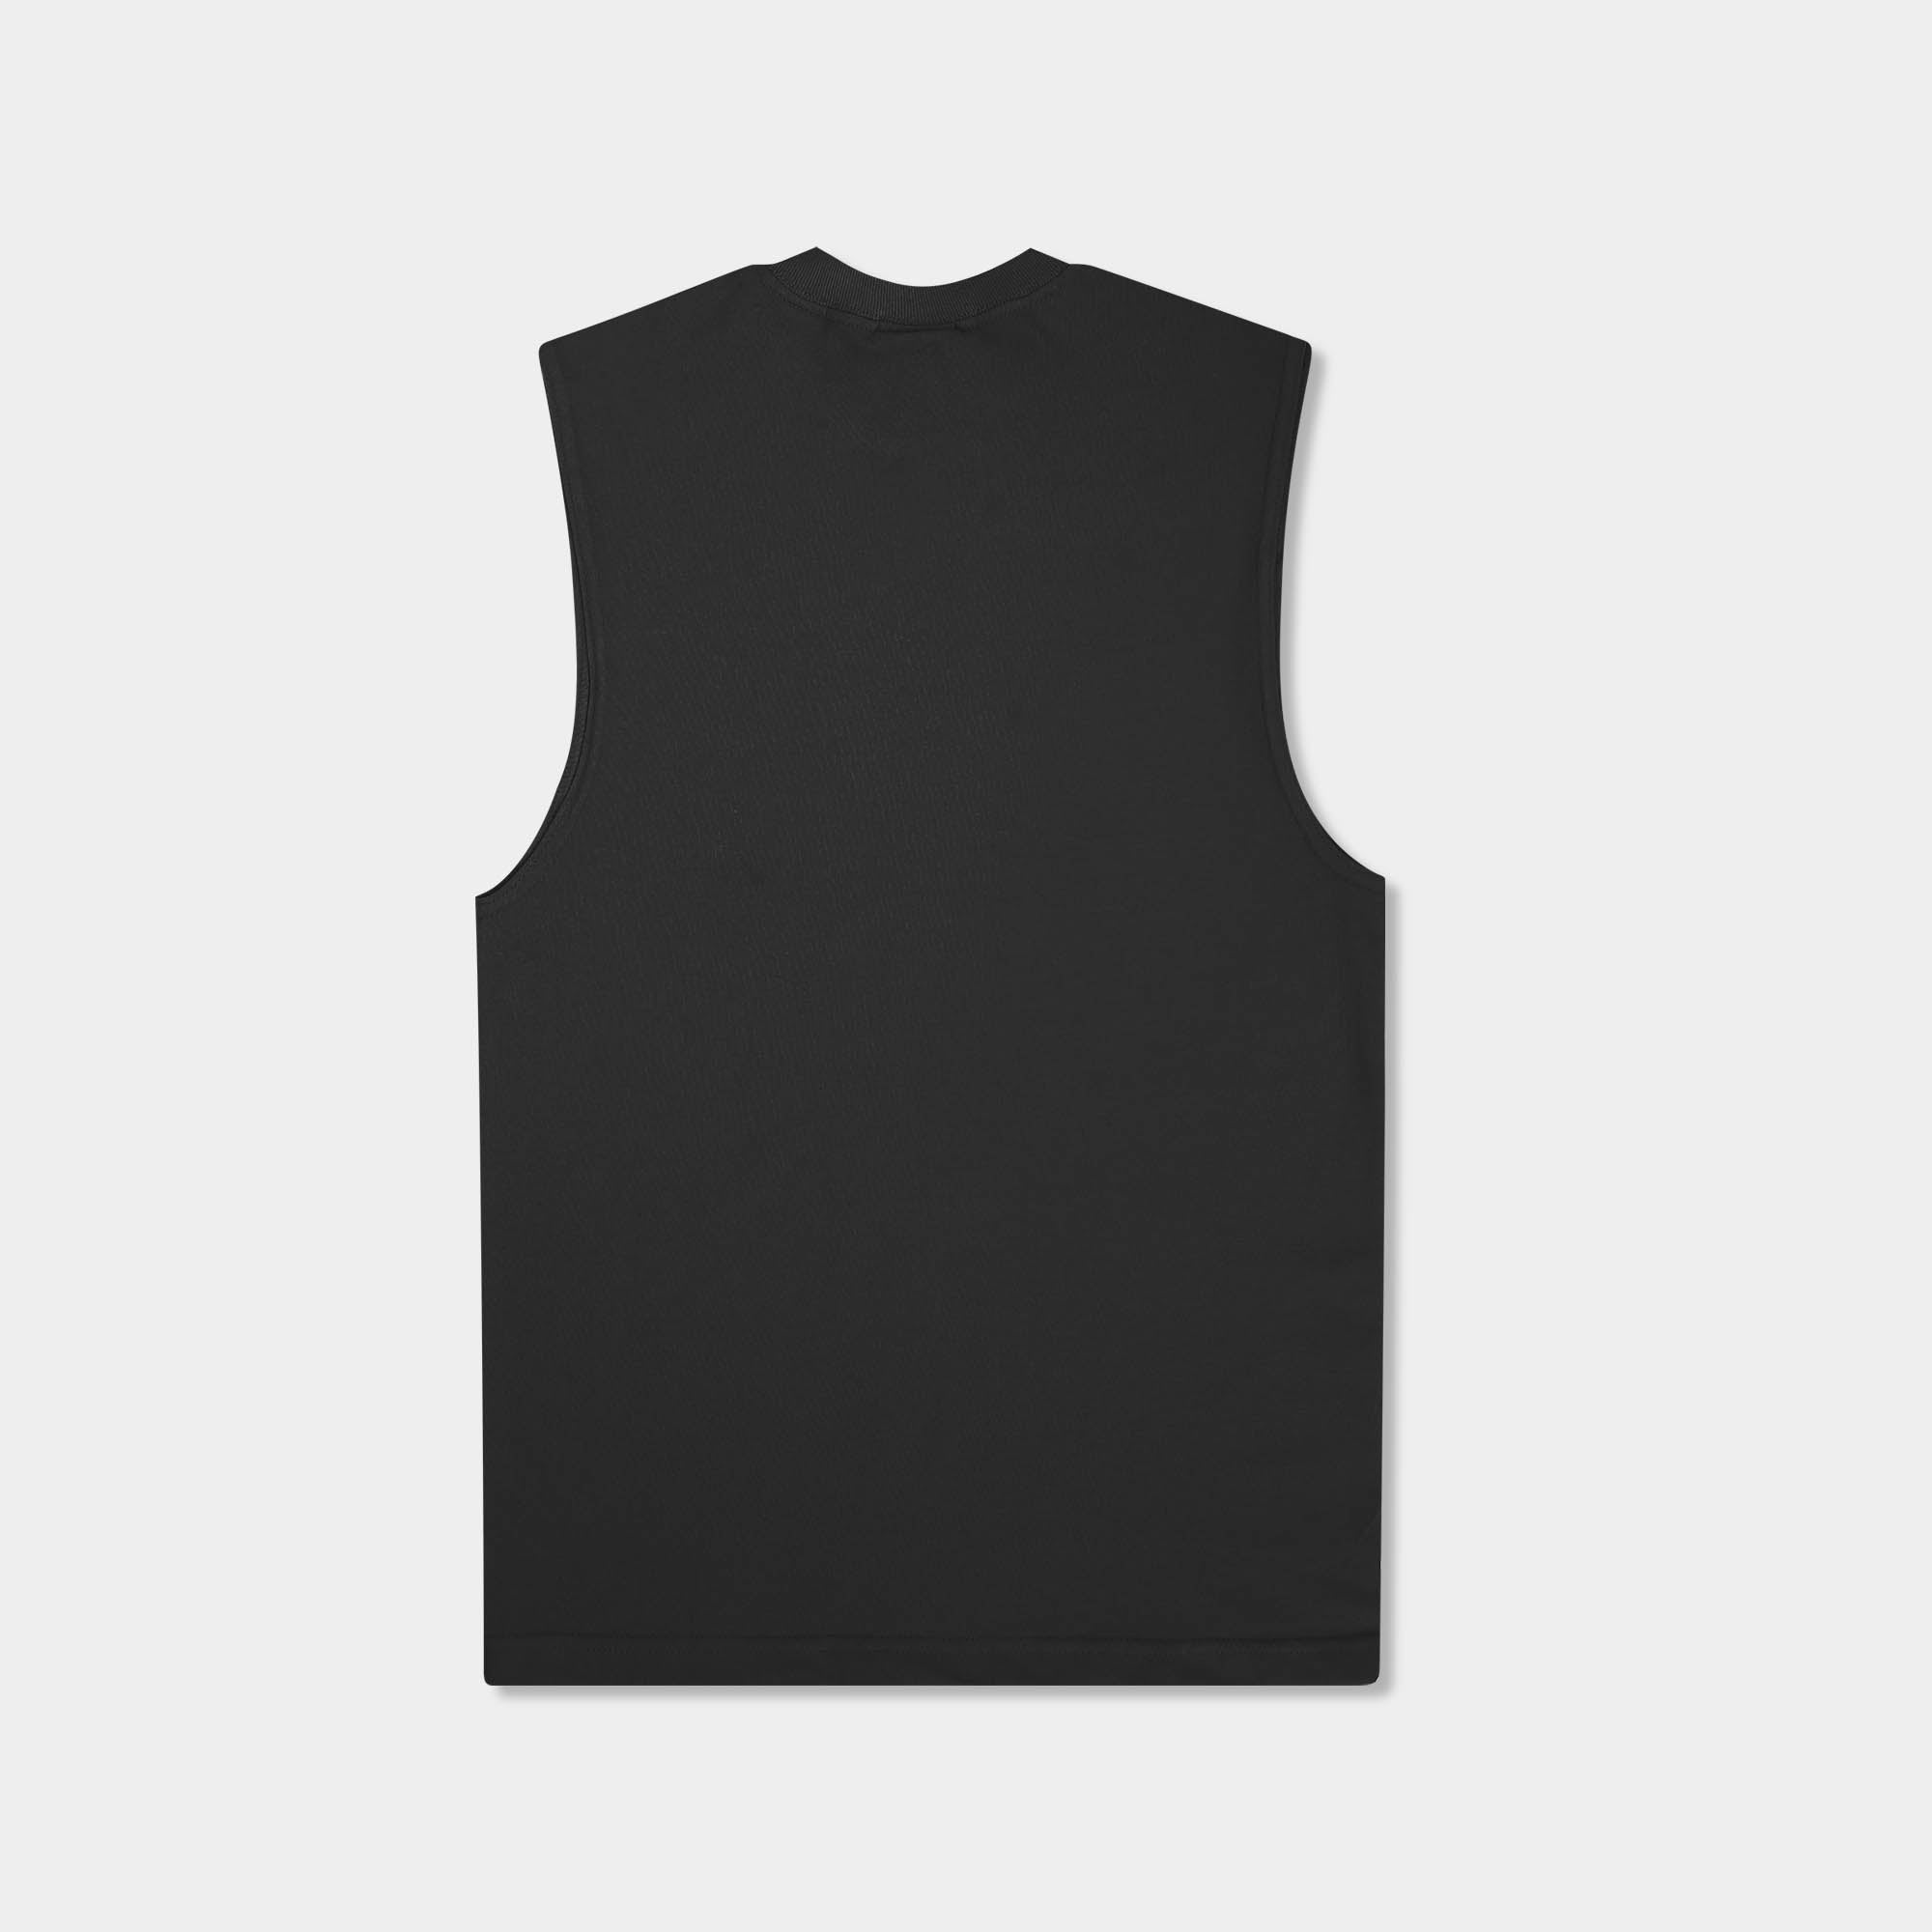 muscle tank_muscle tee_muscle tank tops_cropped muscle tank_under armour muscle shirt_insta slim tank_men muscle shirt_tank top_Black